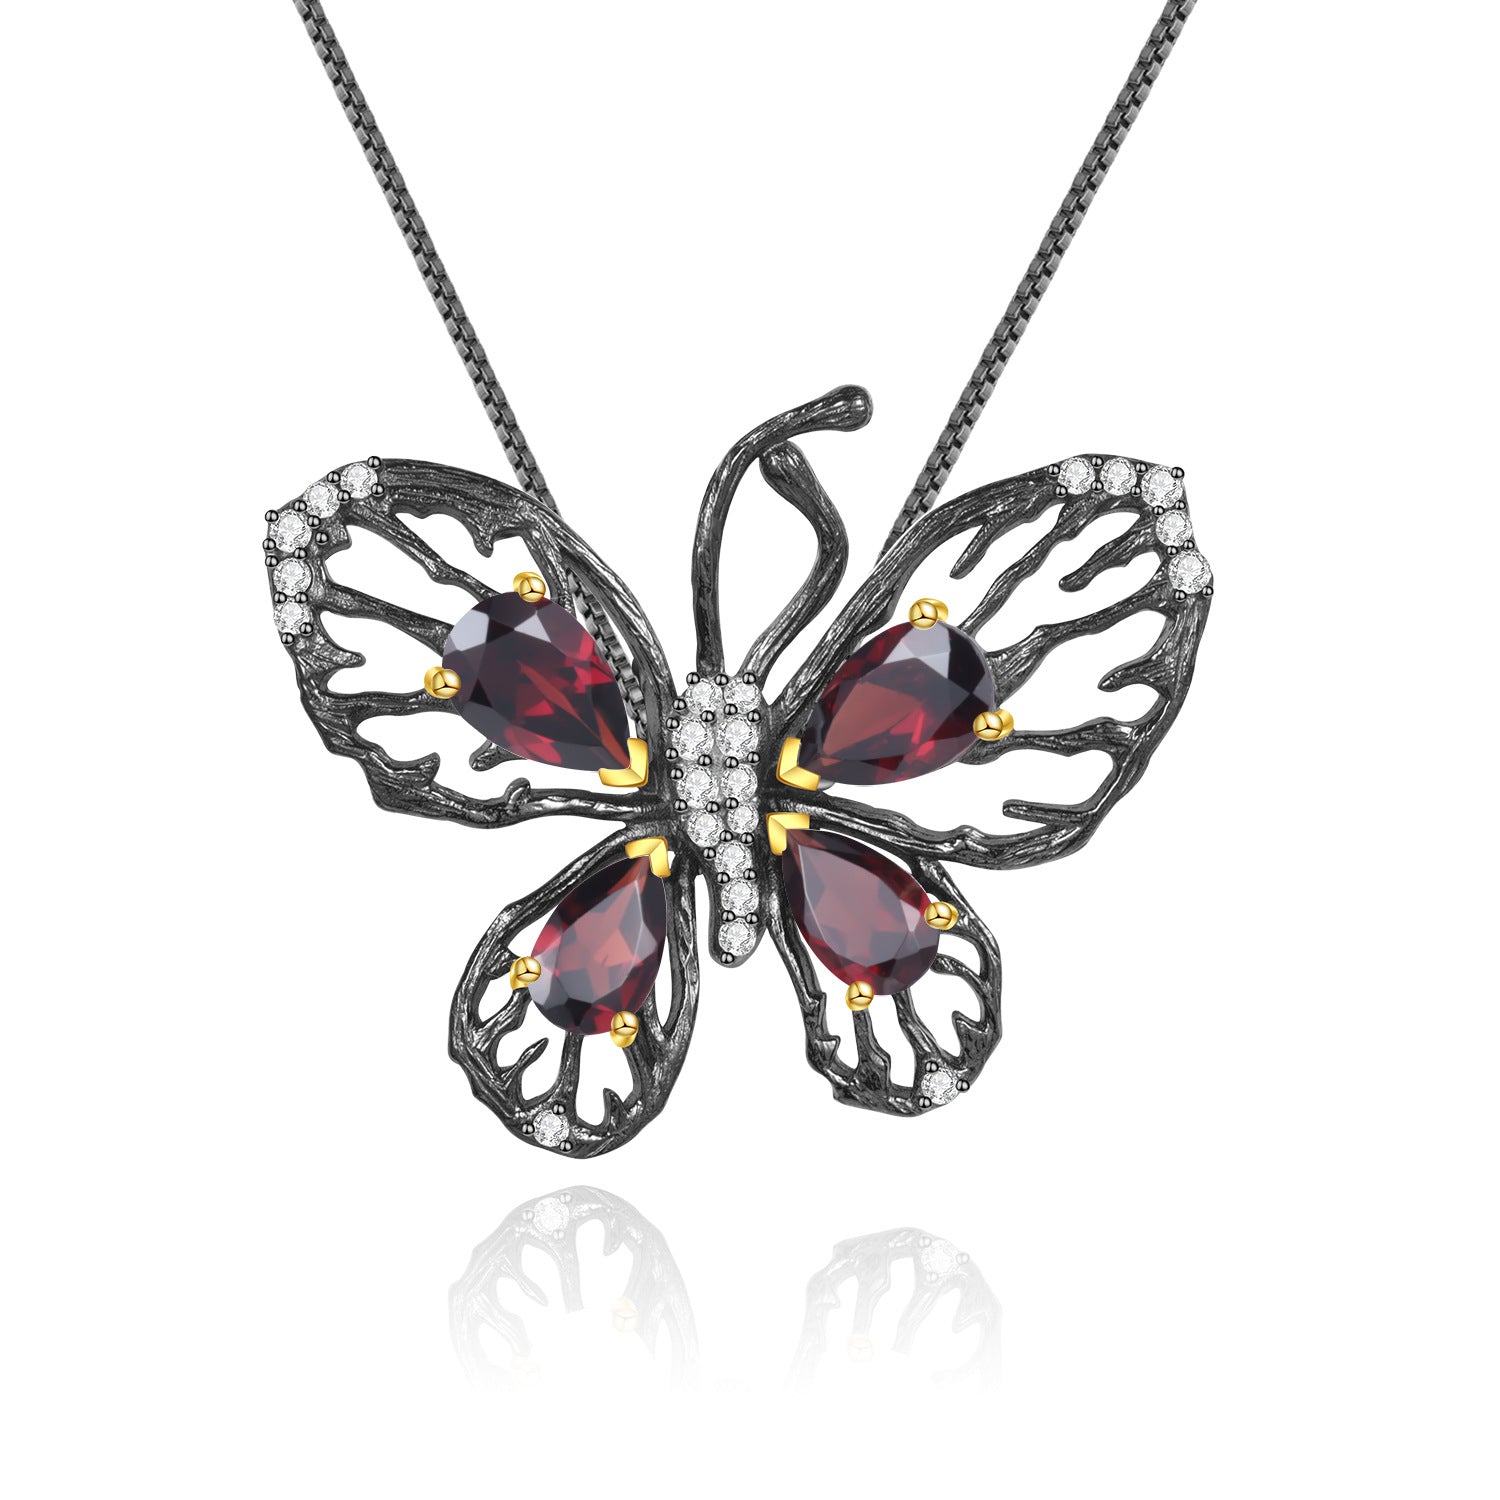 Luxury Butterfly Natural Colourful Gemstone Pendant Silver Necklace for Women